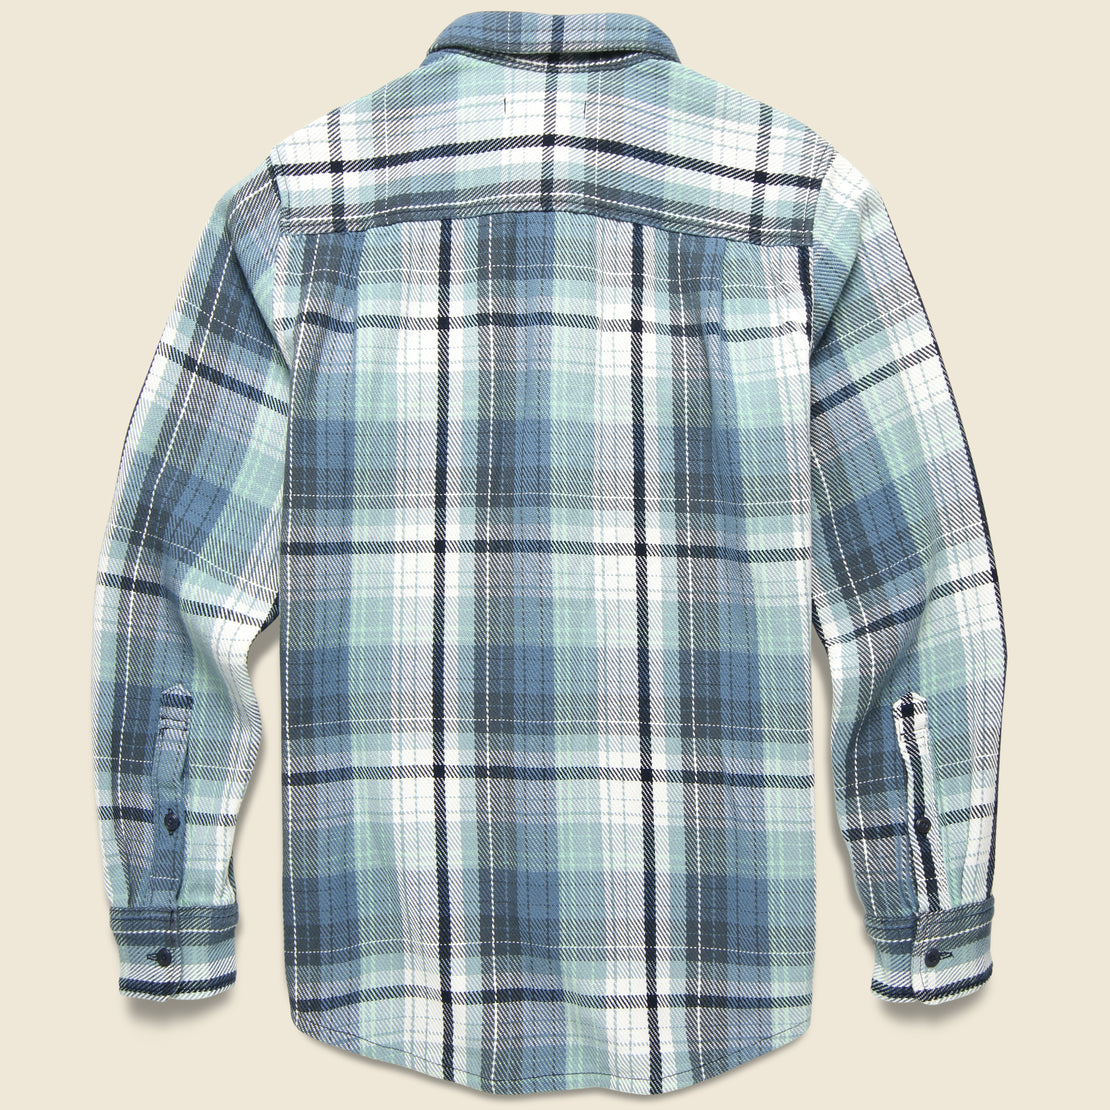 Blanket Shirt - Daylight Seaview Plaid - Outerknown - STAG Provisions - Tops - L/S Woven - Plaid